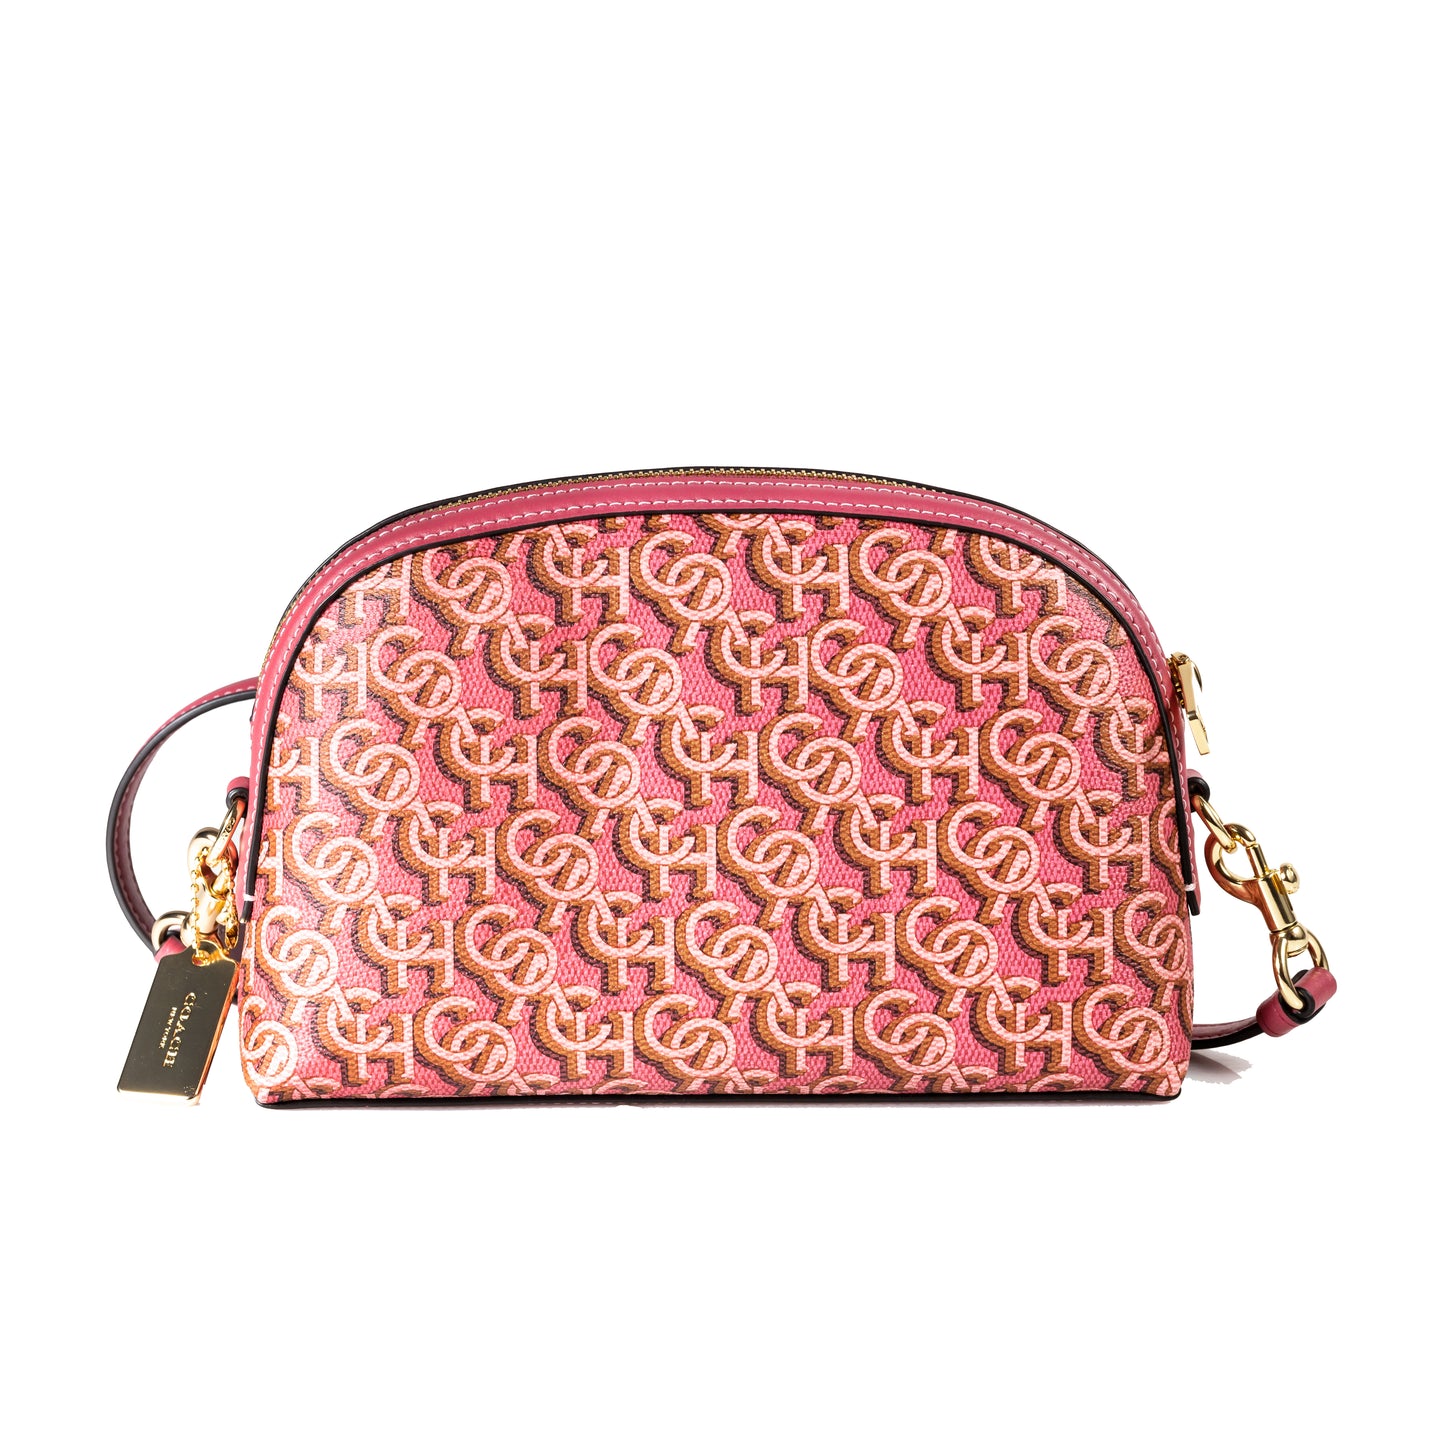 Madi Crossbody With Coach Monogram Print Printed Coated Canvas and Smooth Leather Construction Inside Multifunction Pocket Zip Closure, Fabric Lining Detachable Strap with a 55.90 cm Drop